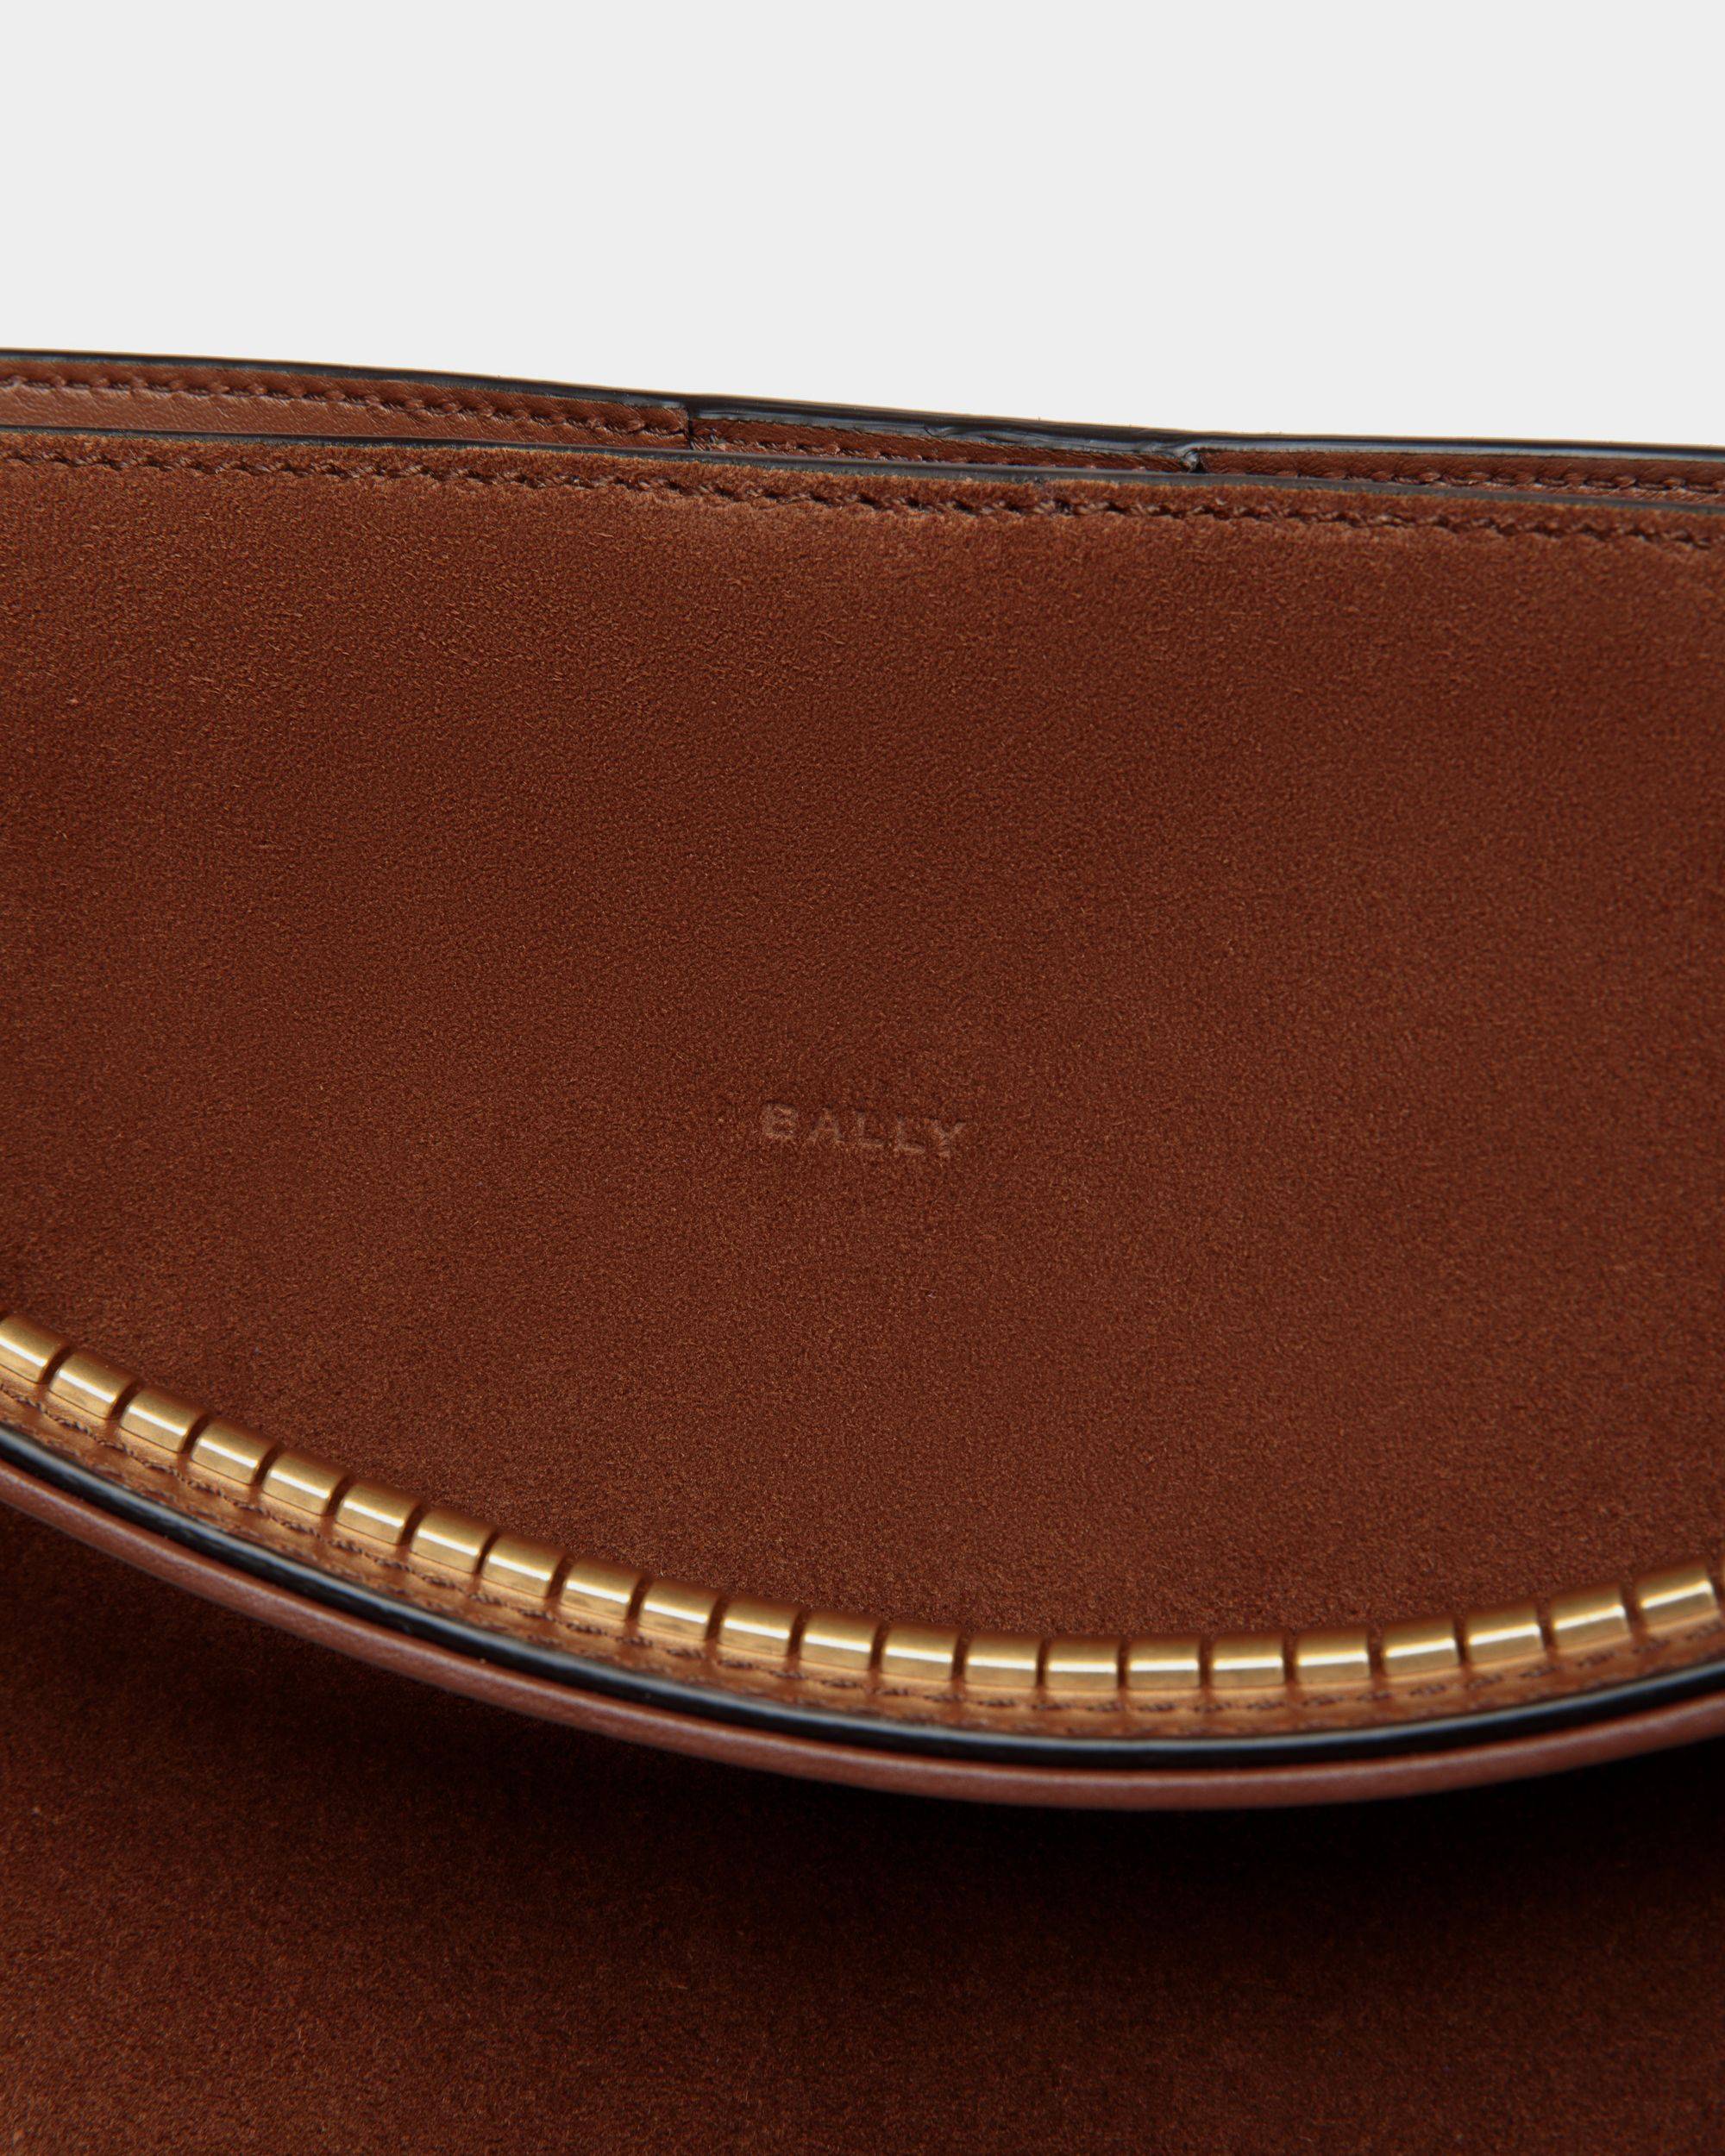 Arkle | Women's Hobo Bag in Brown Suede | Bally | Still Life Detail